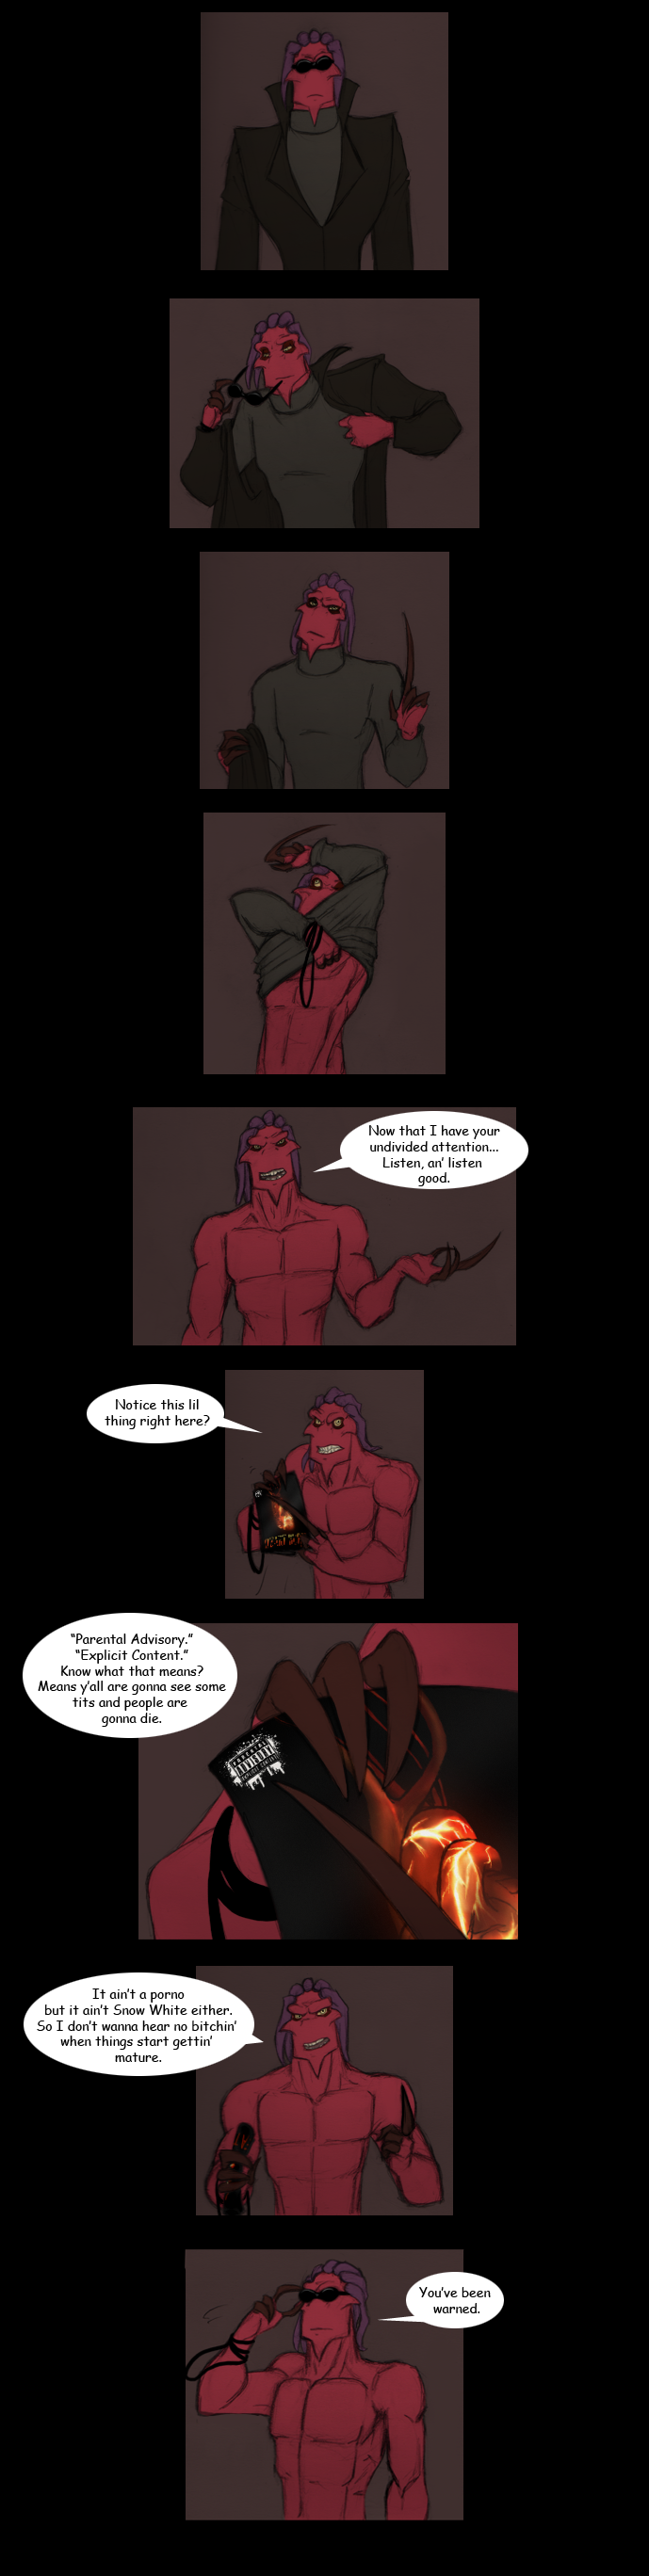 Thrax's Warning about Heart Burn